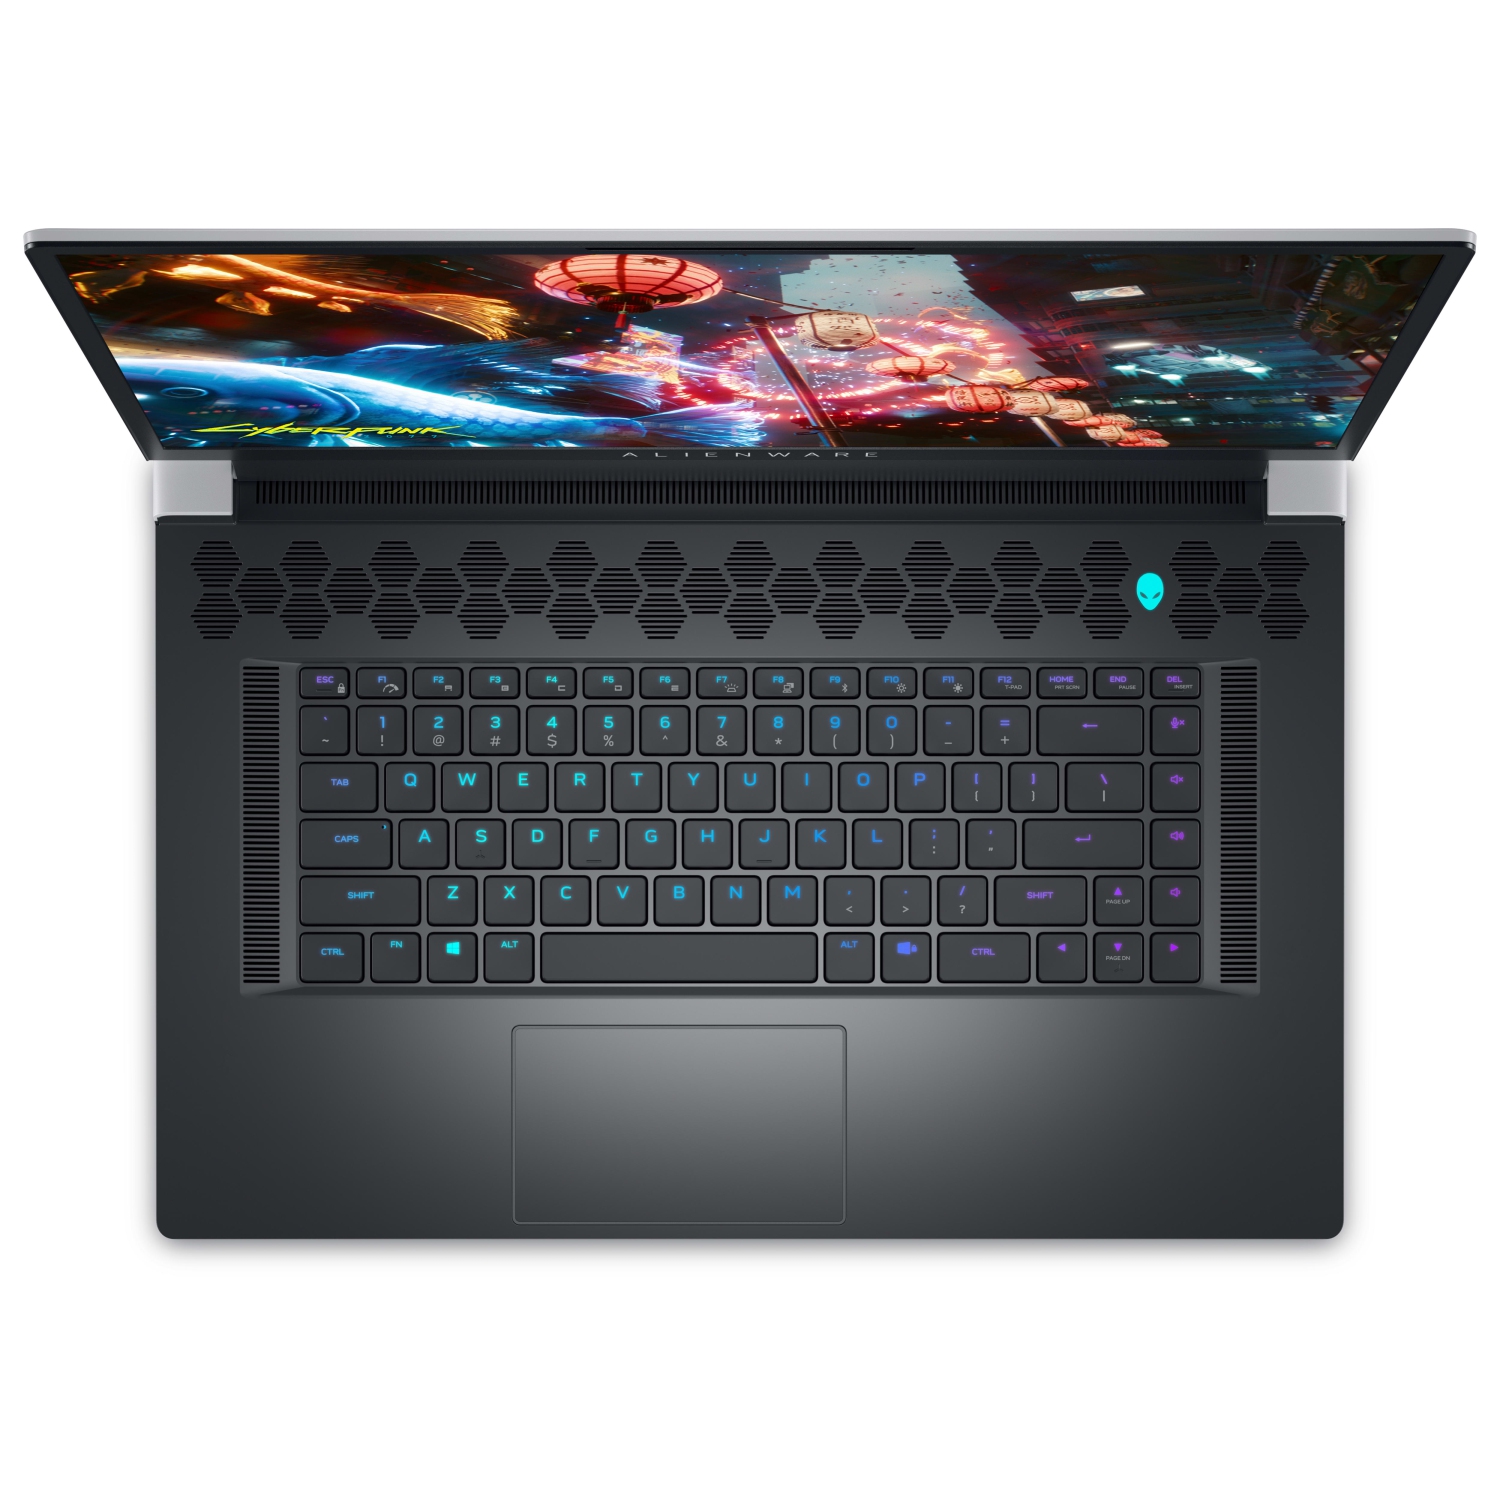 Refurbished (Excellent) – Dell Alienware X17 R2 Gaming Laptop (2022) | 17.3" FHD | Core i9 - 1TB SSD - 64GB RAM - RTX 3080 | 14 Cores @ 5 GHz - 12th Gen CPU - 10GB GDDR6X